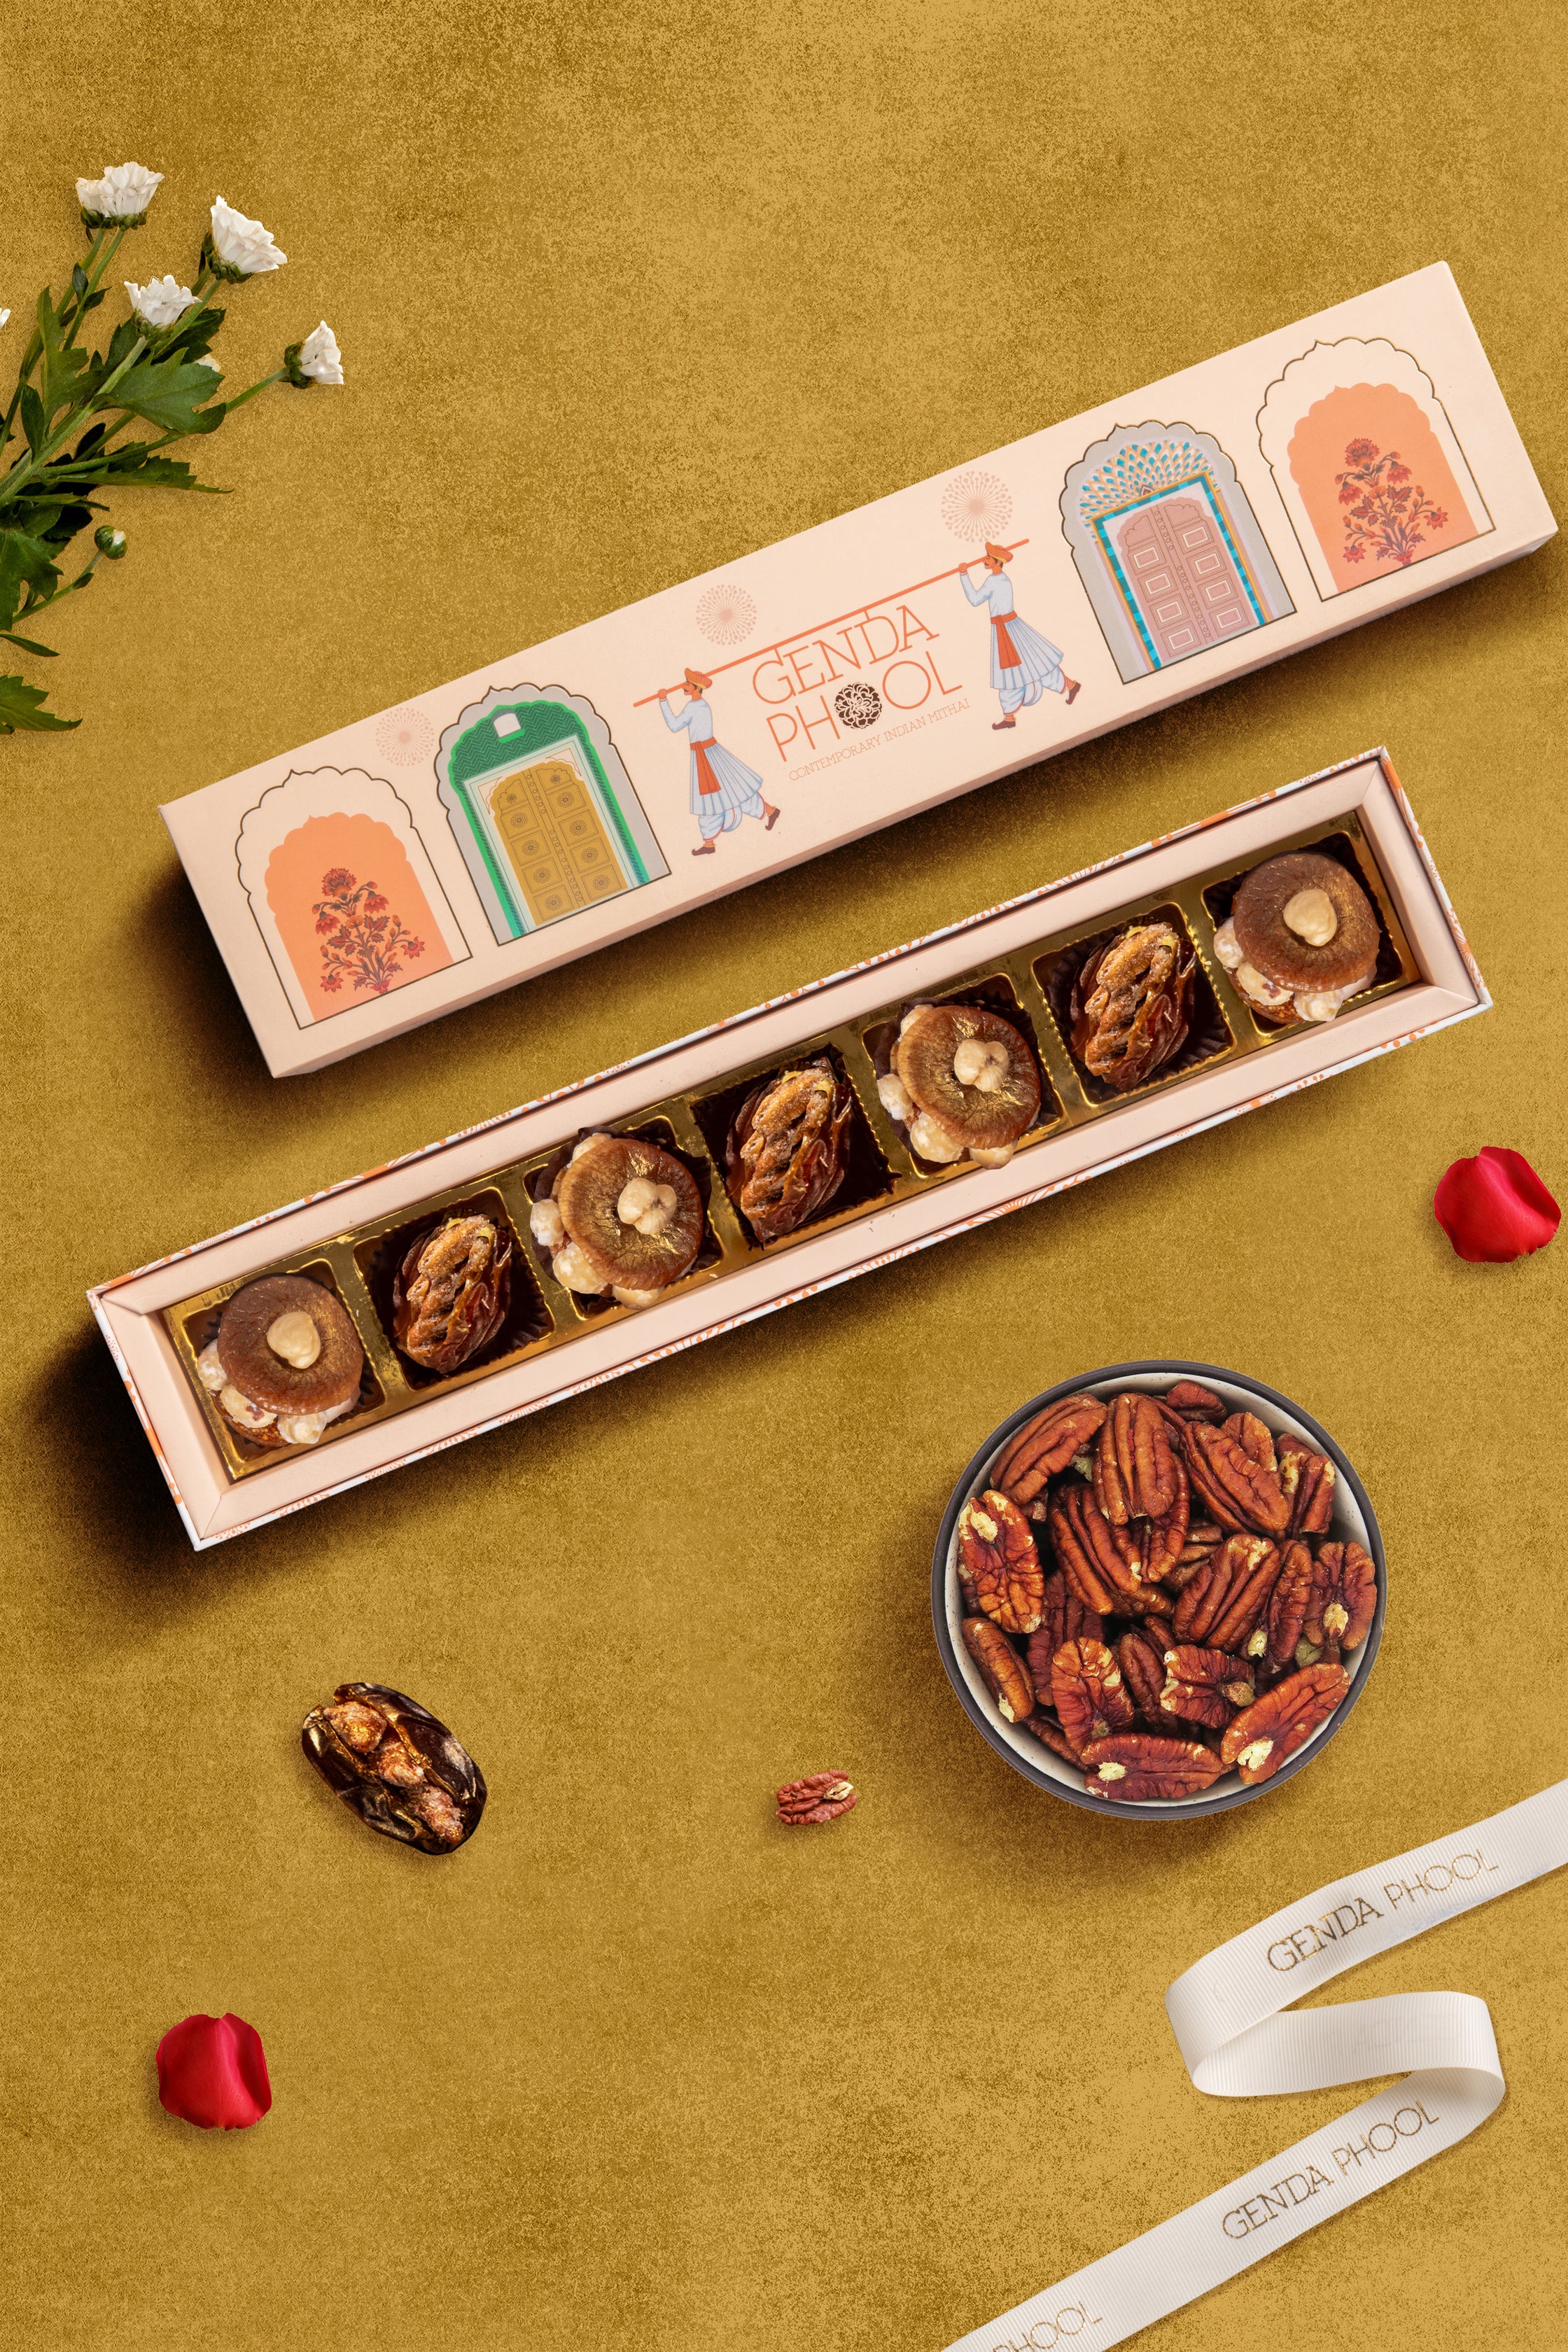 SEEDSY Stuffed Date with Dried Fruits | Holi Gift Hamper Box Pack with Nuts  Almond, Pistachios, WalNut, Orange Peel | Pack of 20 Assorted Sweet and  Spicy Healthy Dates | Stuffed in